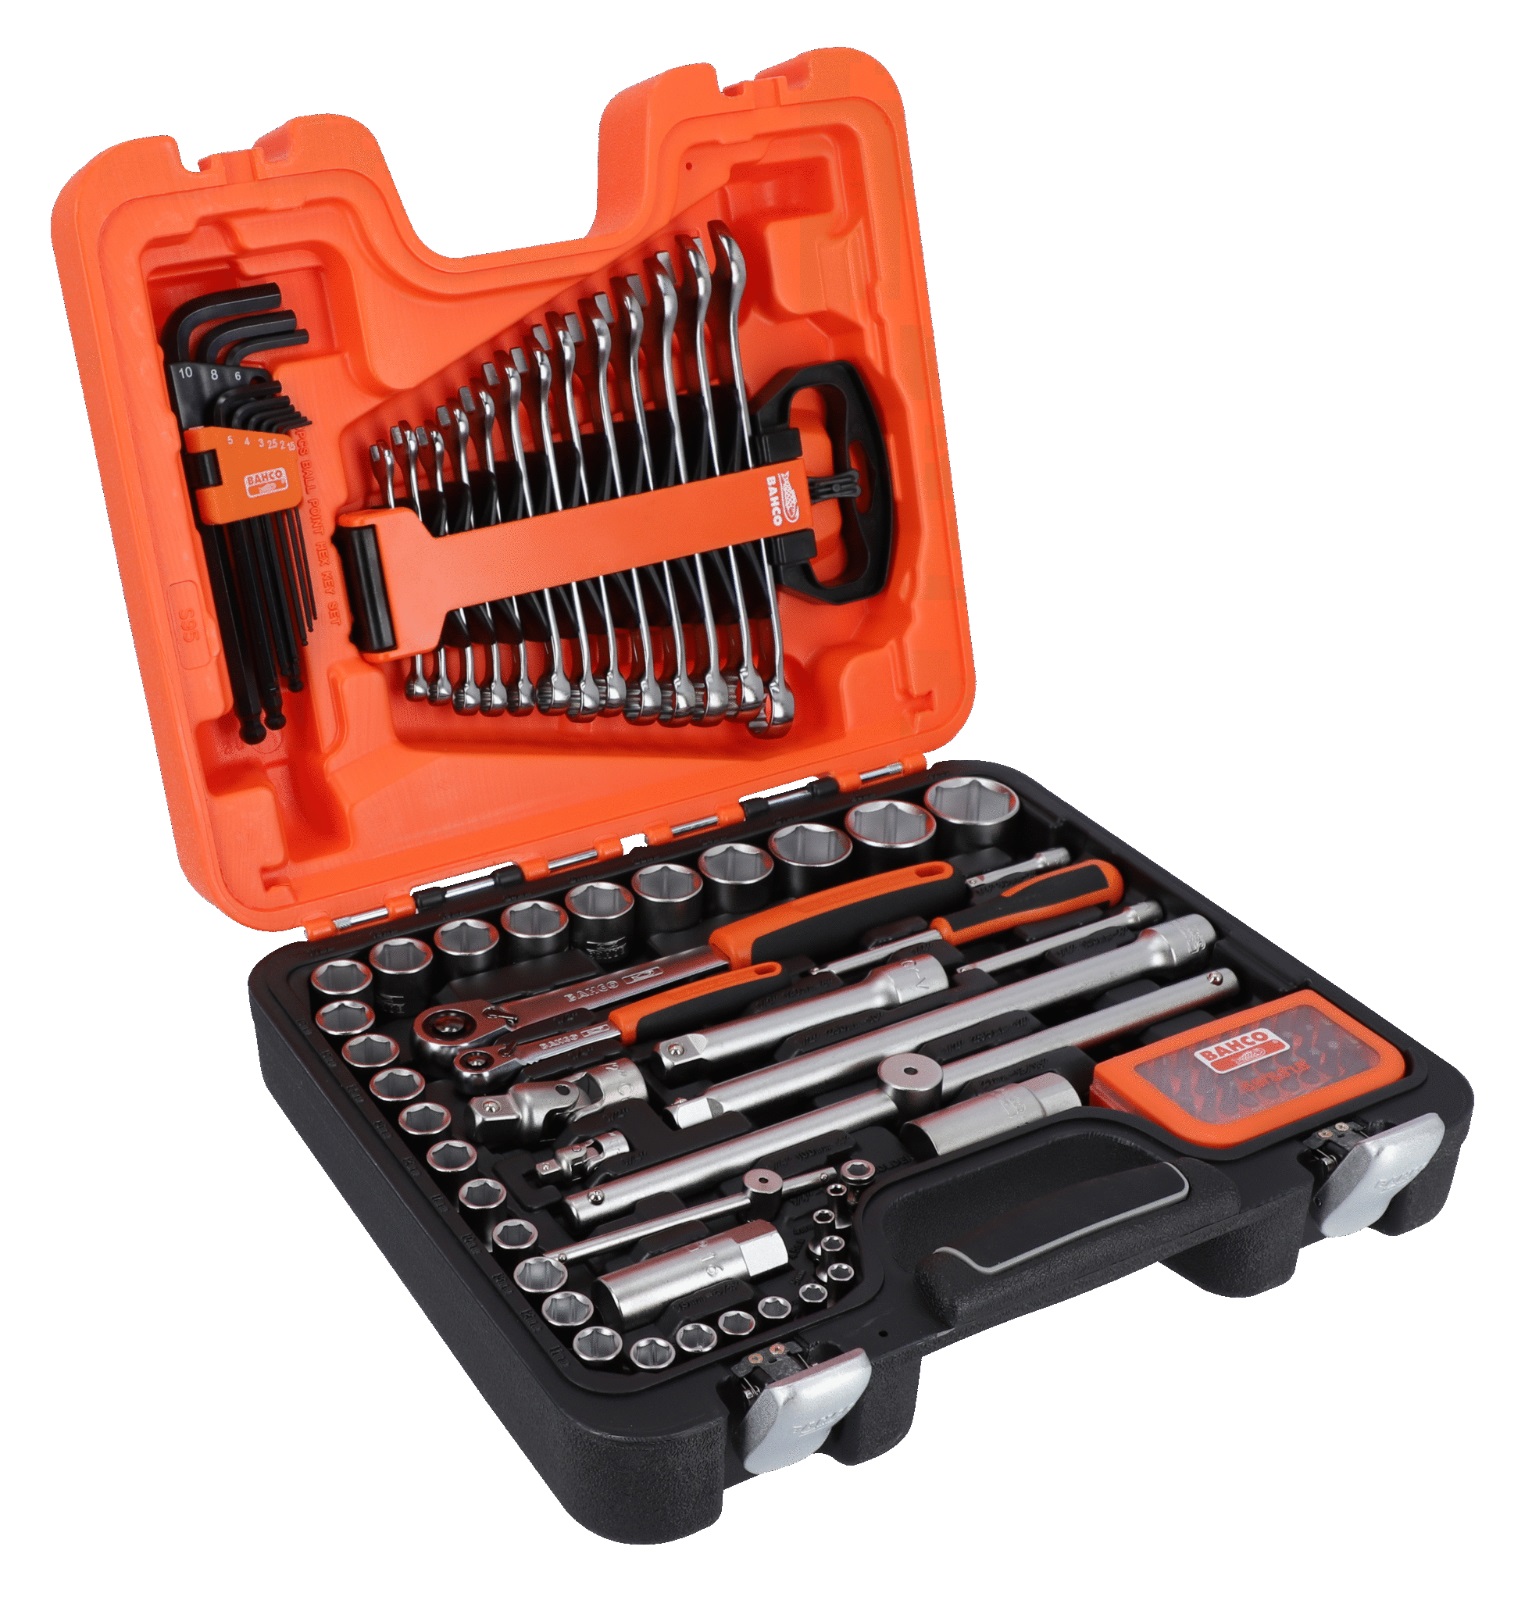 Bahco 95 Piece 1/4in and 1/2in Sq Dv Socket and Mechanics Set - XMS23SOC1214